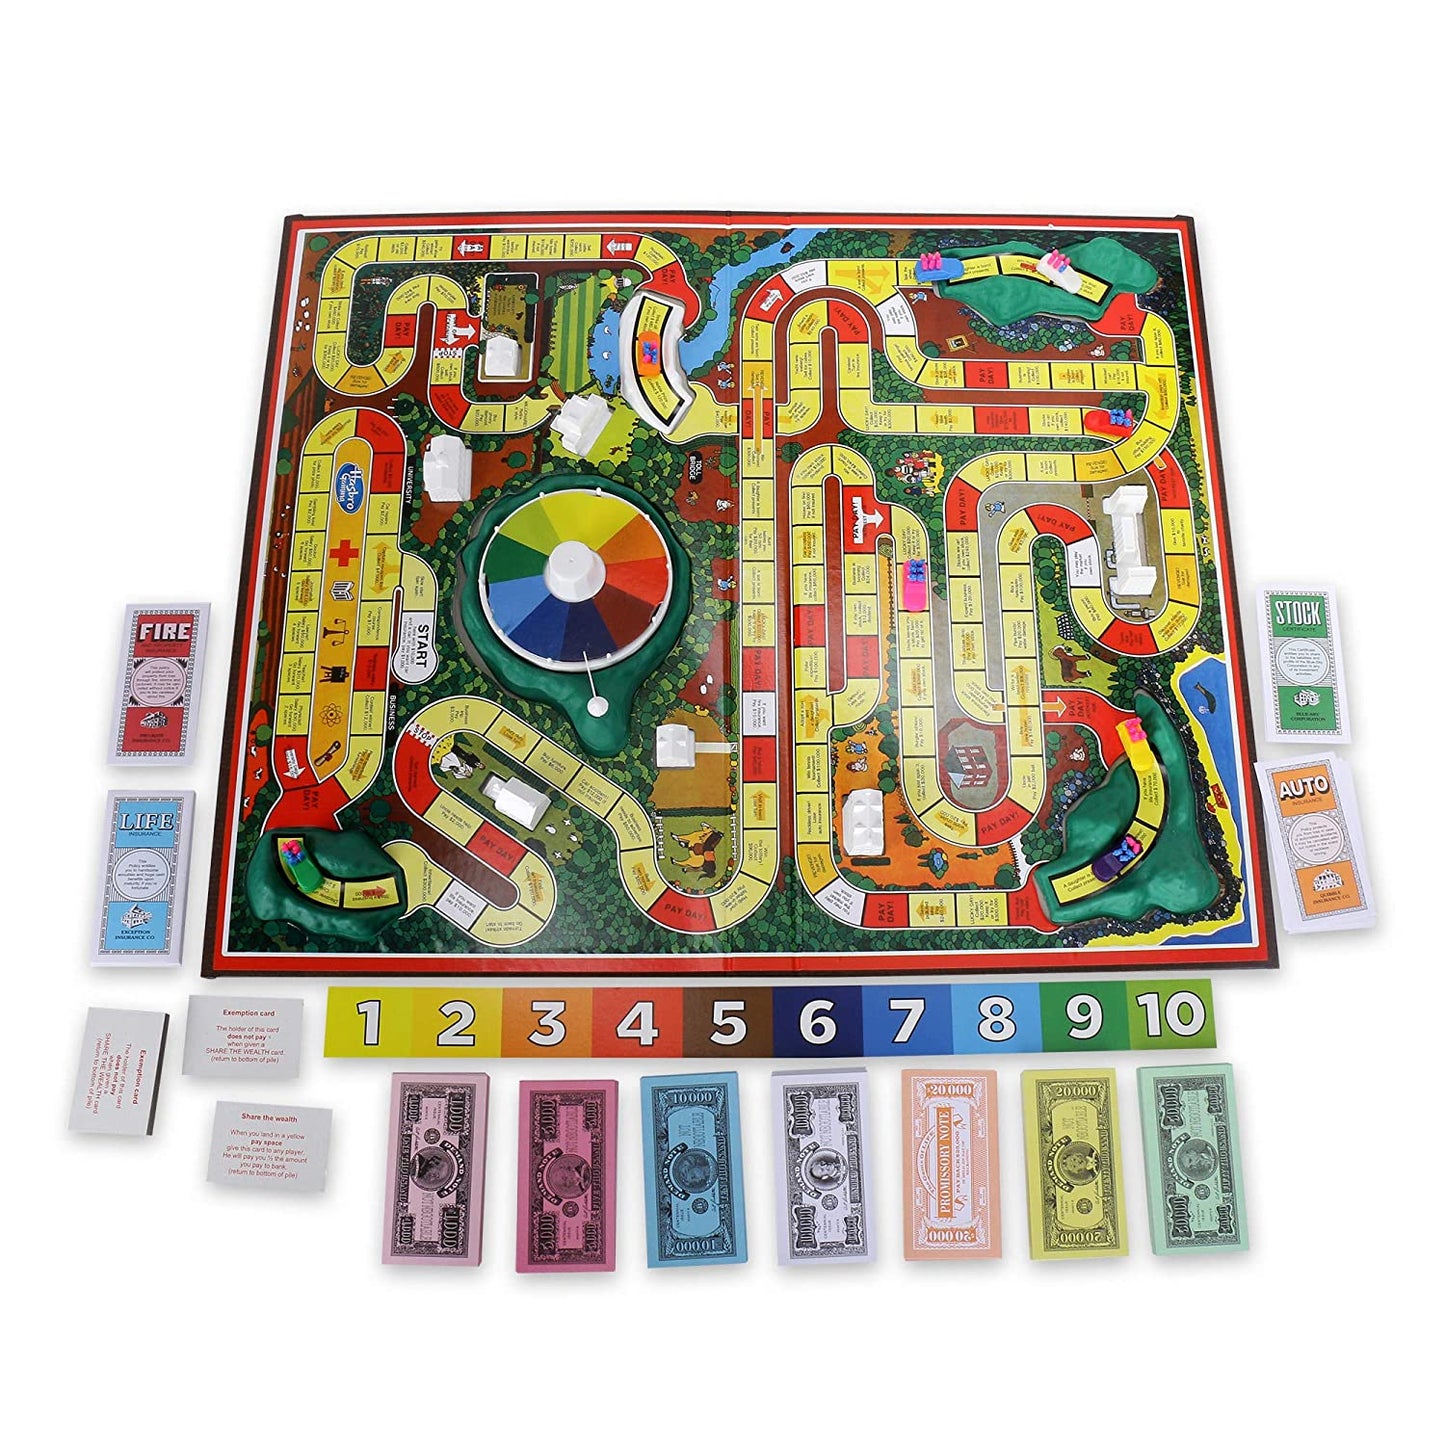 Hasbro Gaming - The Game of Life Strategy Board Game - Fun for Families & Kids Ages 9+ - 2-8 Players - Multicolor